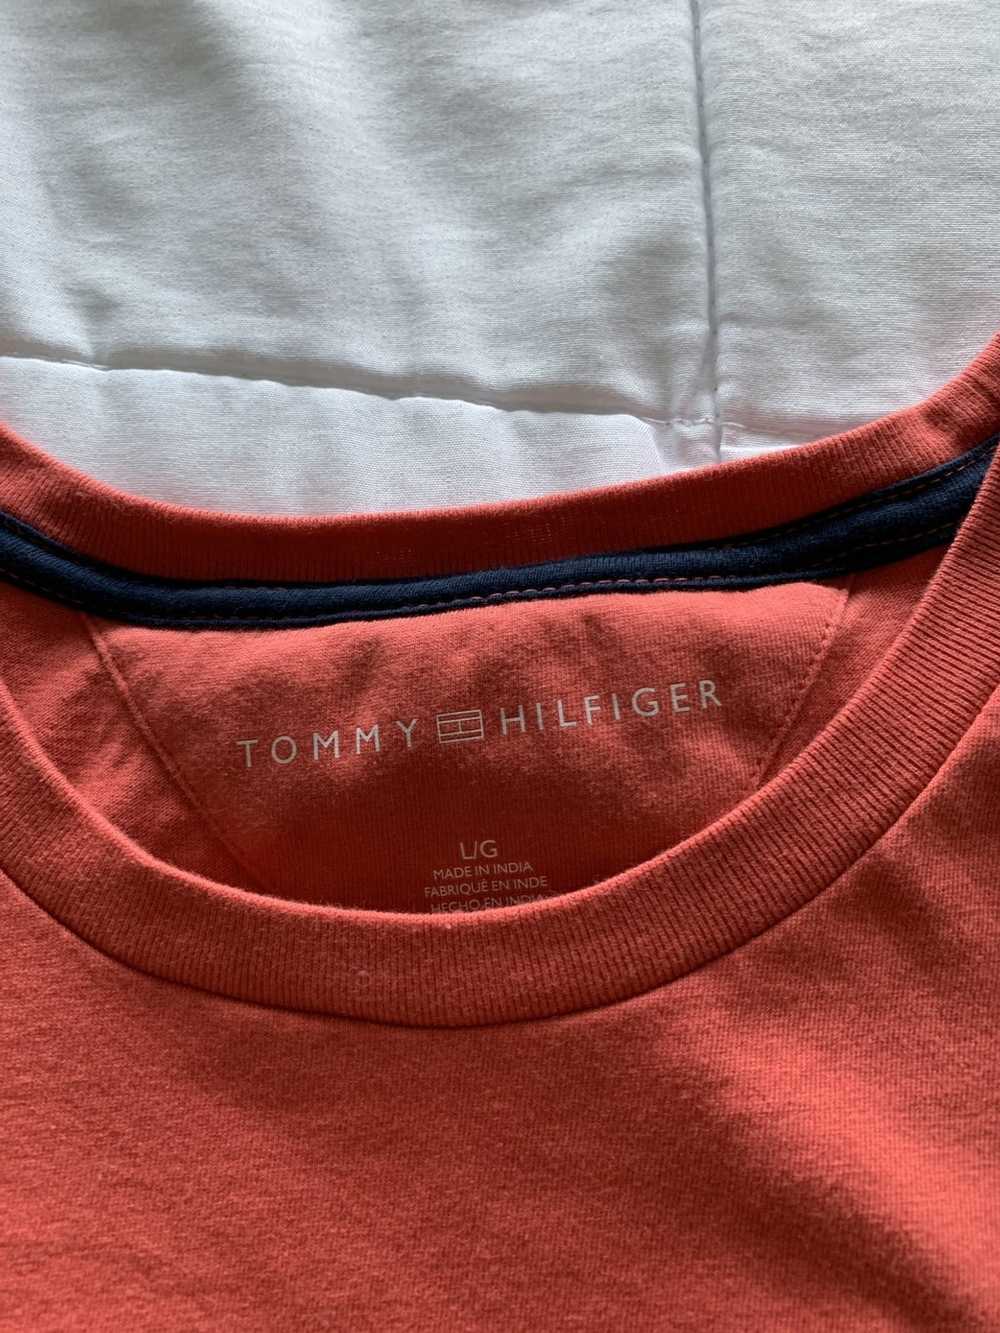 Tommy Hilfiger Tommy Hilfiger small logo tee - image 2